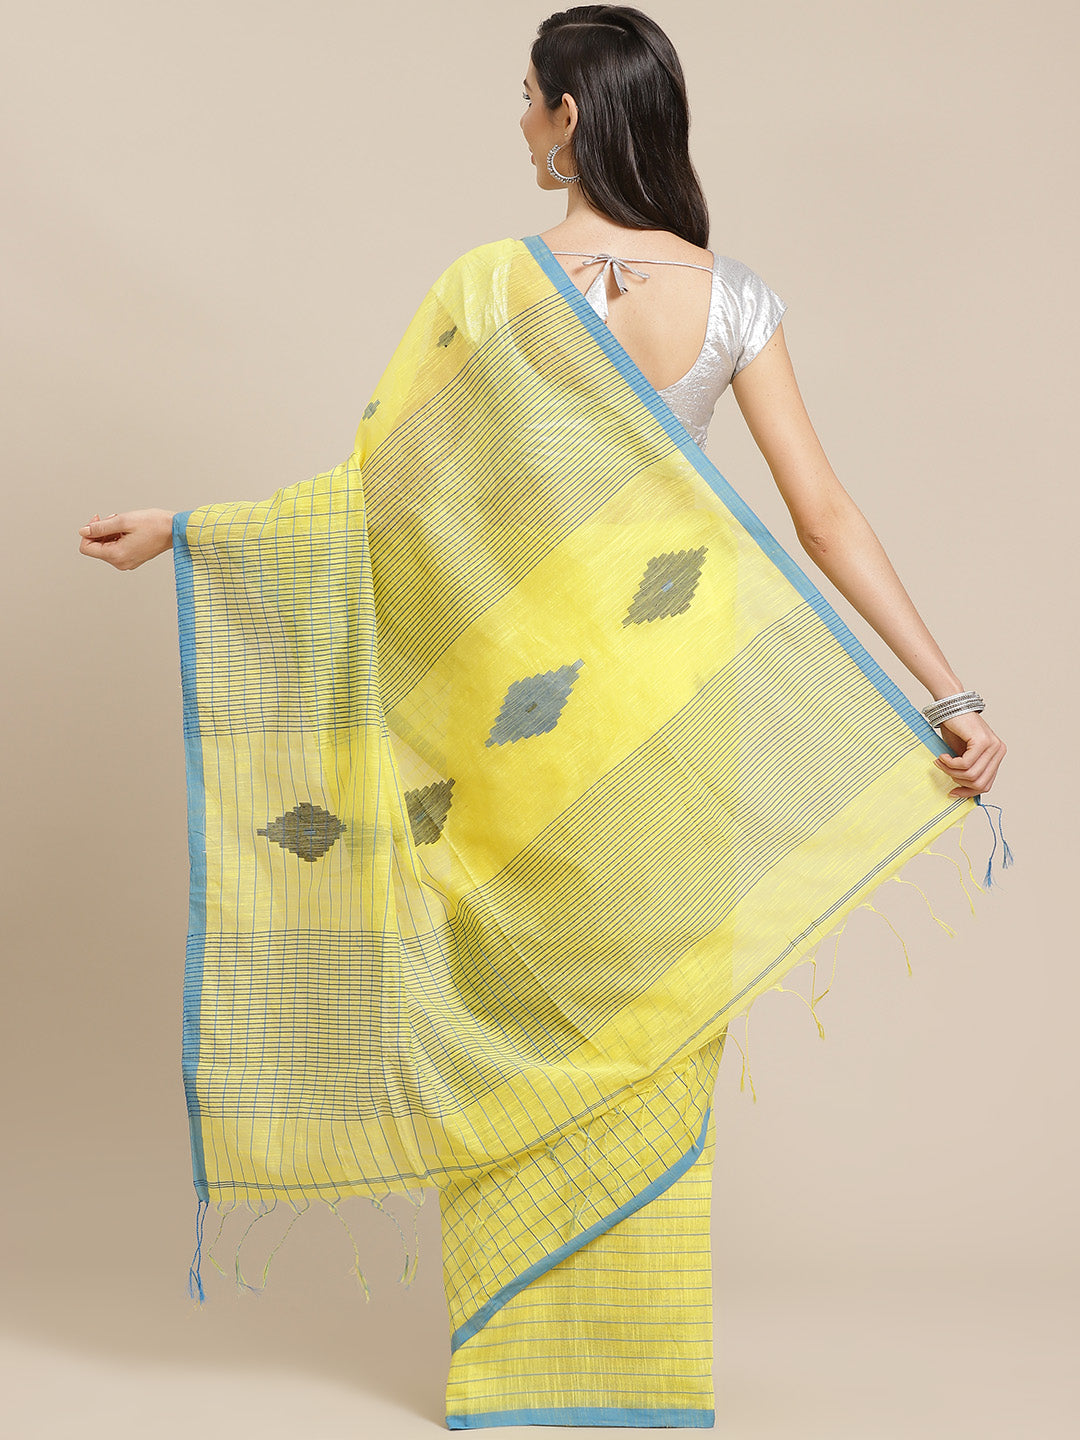 Yellow and Blue, Kalakari India Ikat Silk Cotton Woven Design Saree with Blouse SHBESA0052-Saree-Kalakari India-SHBESA0052-Bengal, Cotton, Geographical Indication, Hand Crafted, Heritage Prints, Ikkat, Natural Dyes, Red, Sarees, Sustainable Fabrics, Woven, Yellow-[Linen,Ethnic,wear,Fashionista,Handloom,Handicraft,Indigo,blockprint,block,print,Cotton,Chanderi,Blue, latest,classy,party,bollywood,trendy,summer,style,traditional,formal,elegant,unique,style,hand,block,print, dabu,booti,gift,present,g